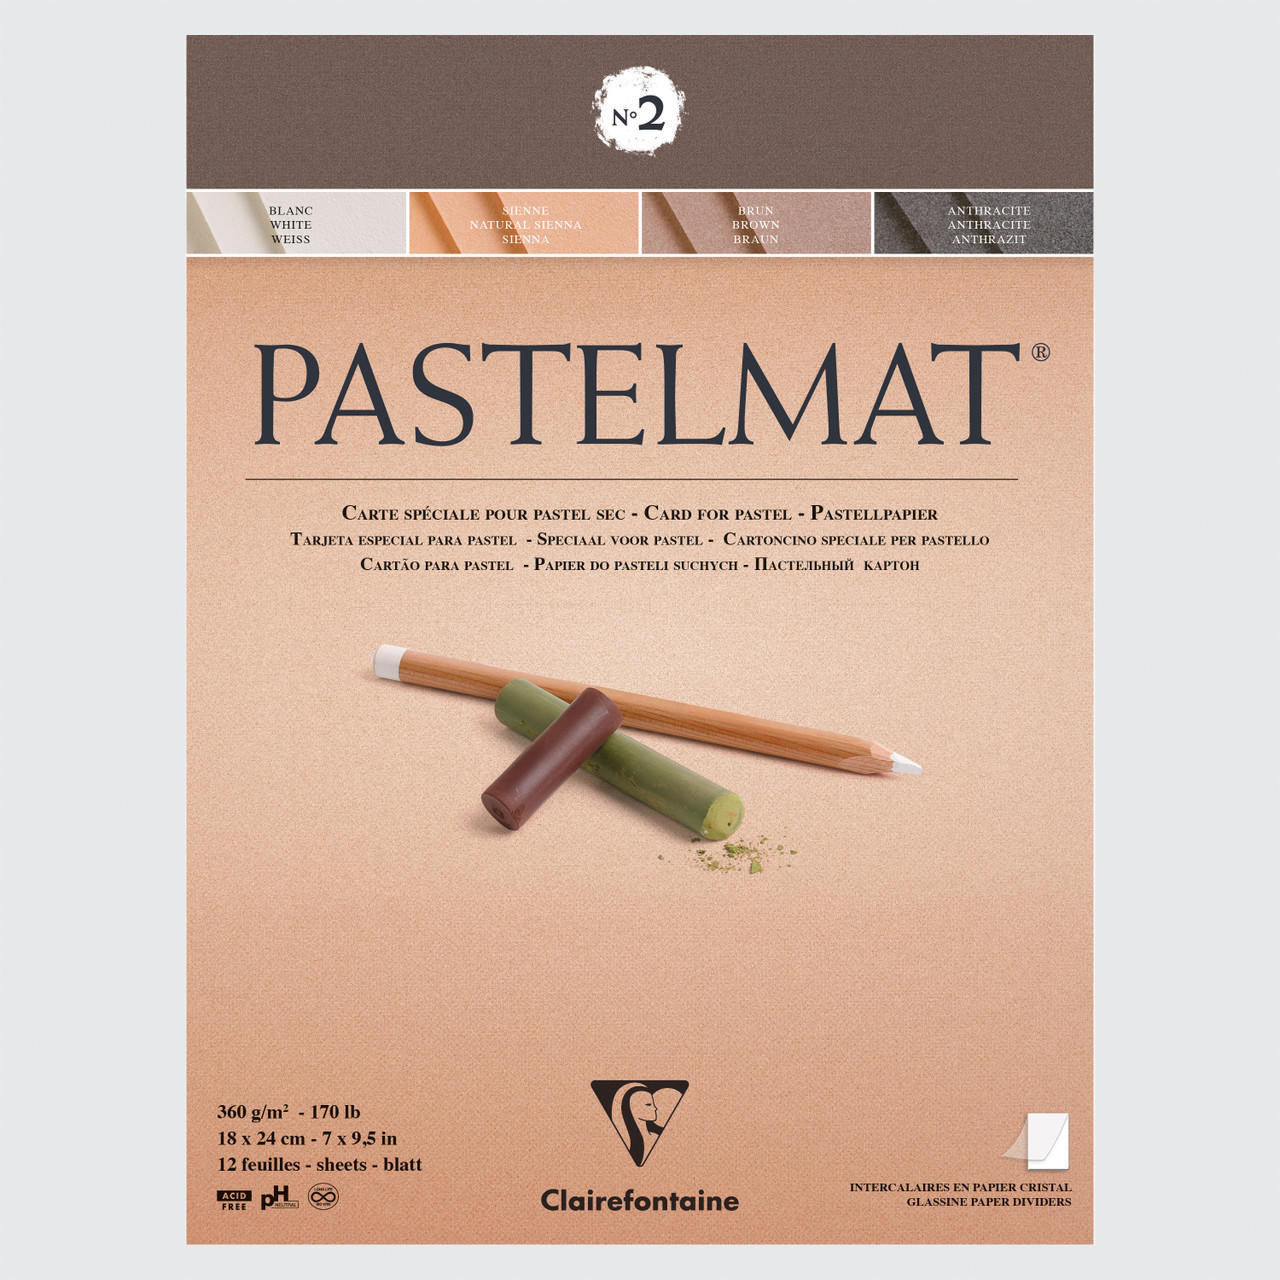 Clairefontaine Pastelmat Pad No. 2 360g 12 sheets 18 x 24cm Assorted Colours